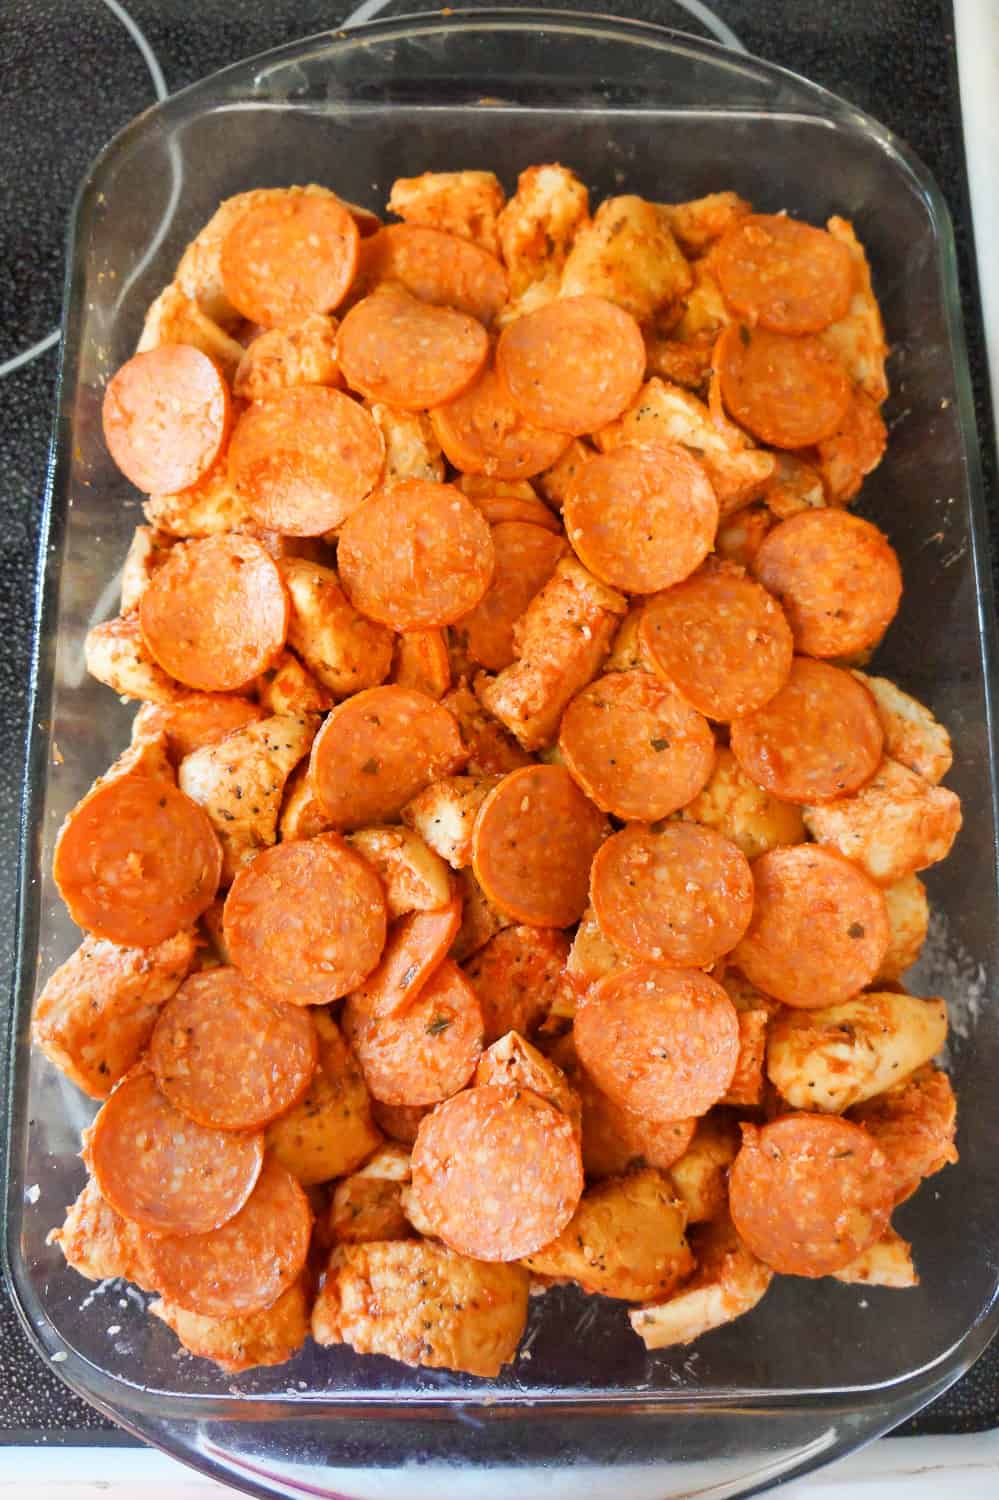 bagel pieces and pepperoni slices in a baking dish